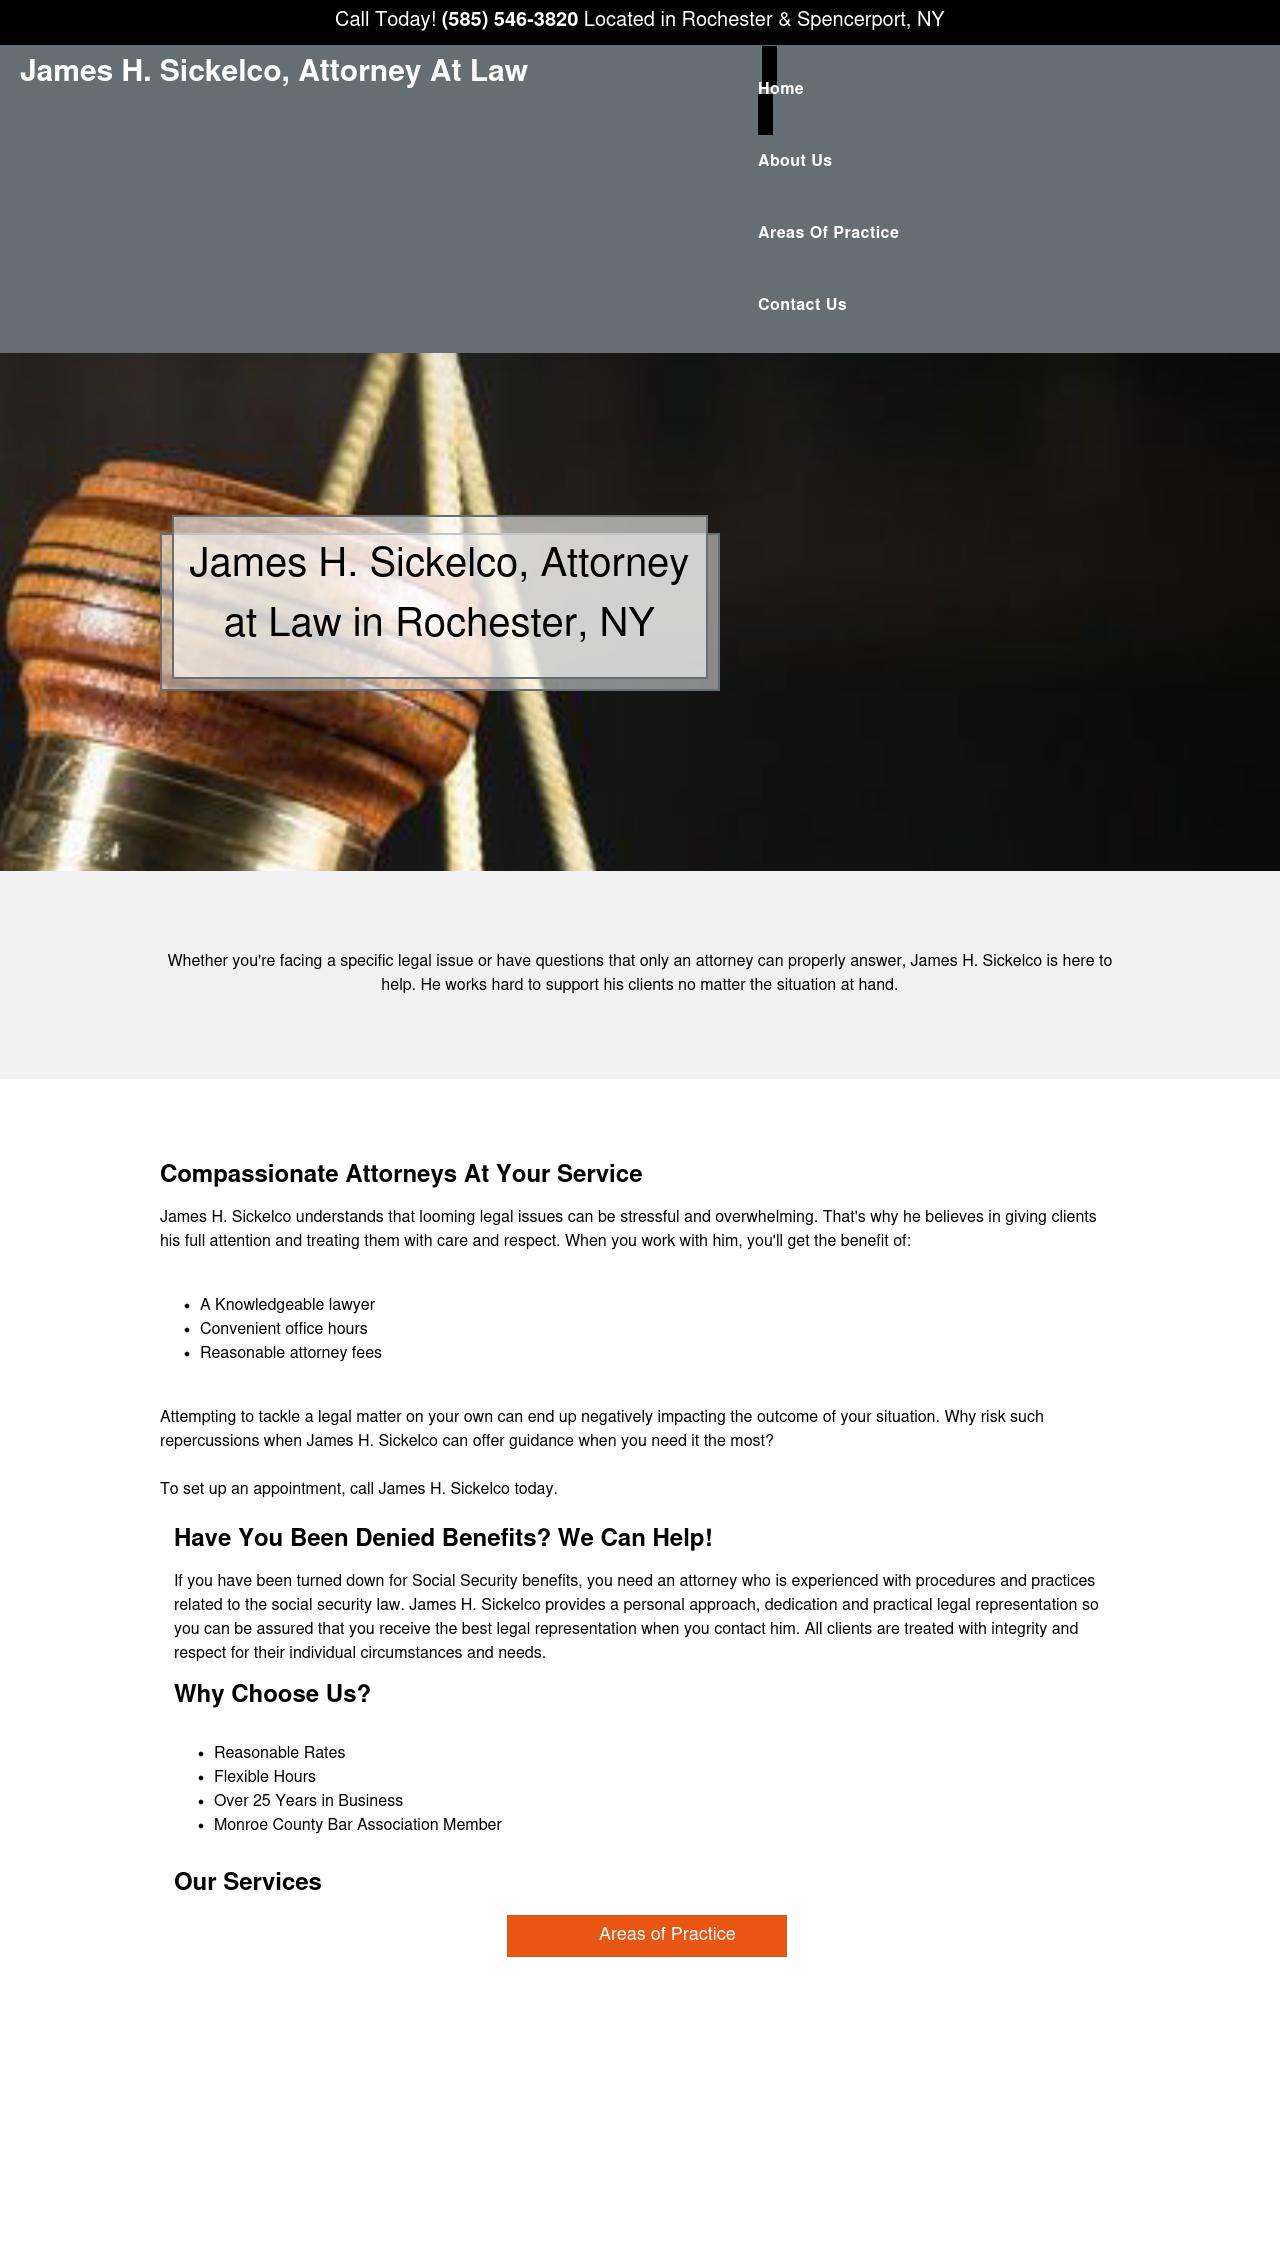 Sickelco James H - Rochester NY Lawyers